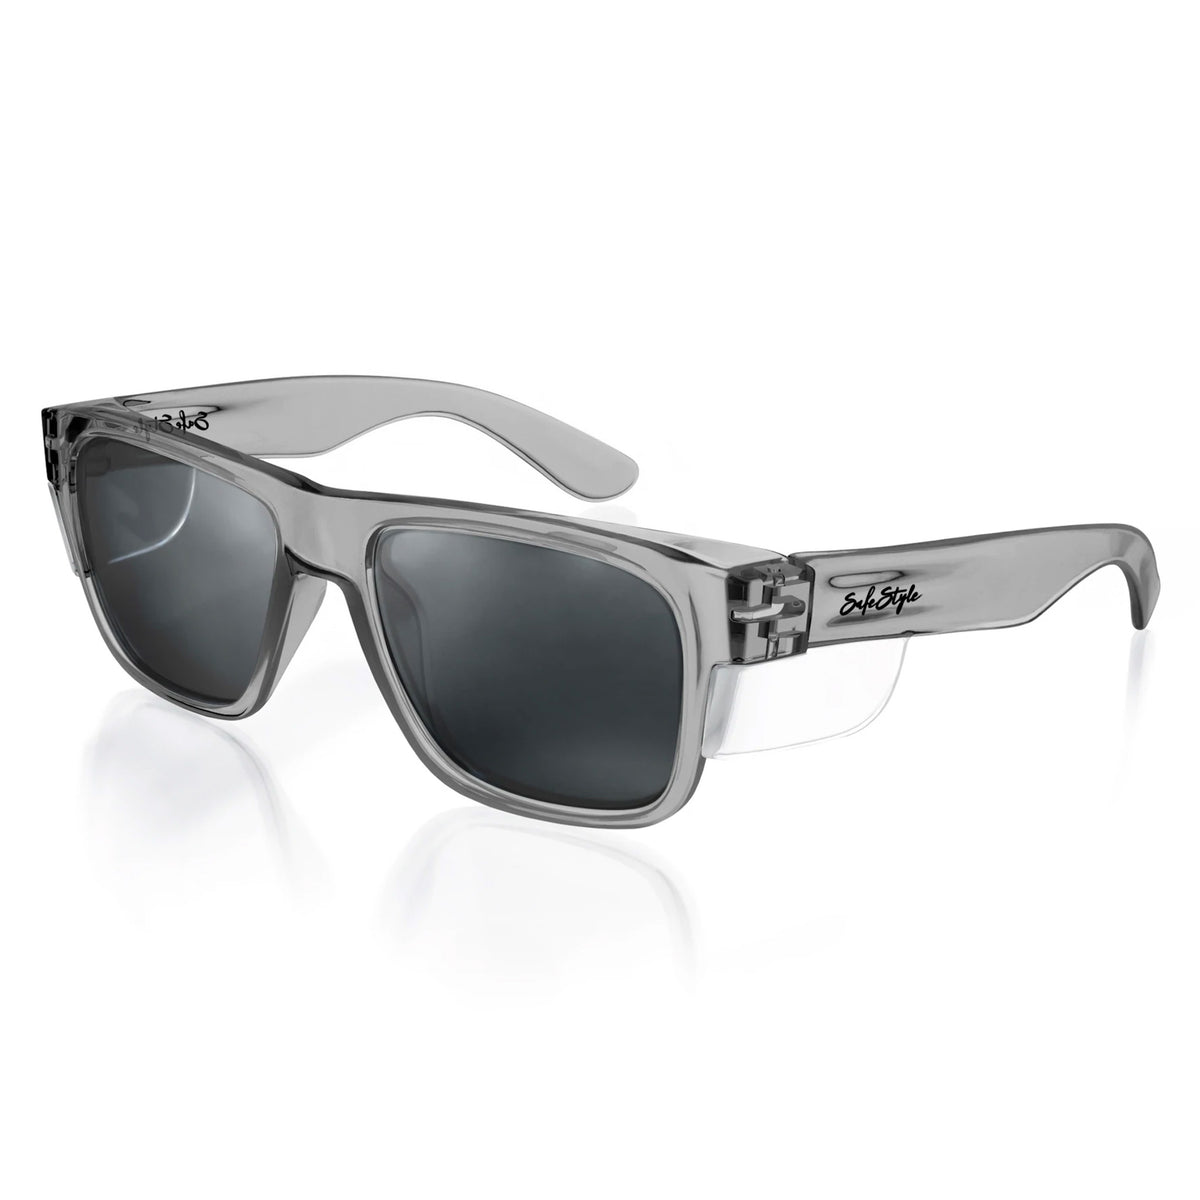 safestyle fusions graphite frame safety glasses with polarised uv400 lens